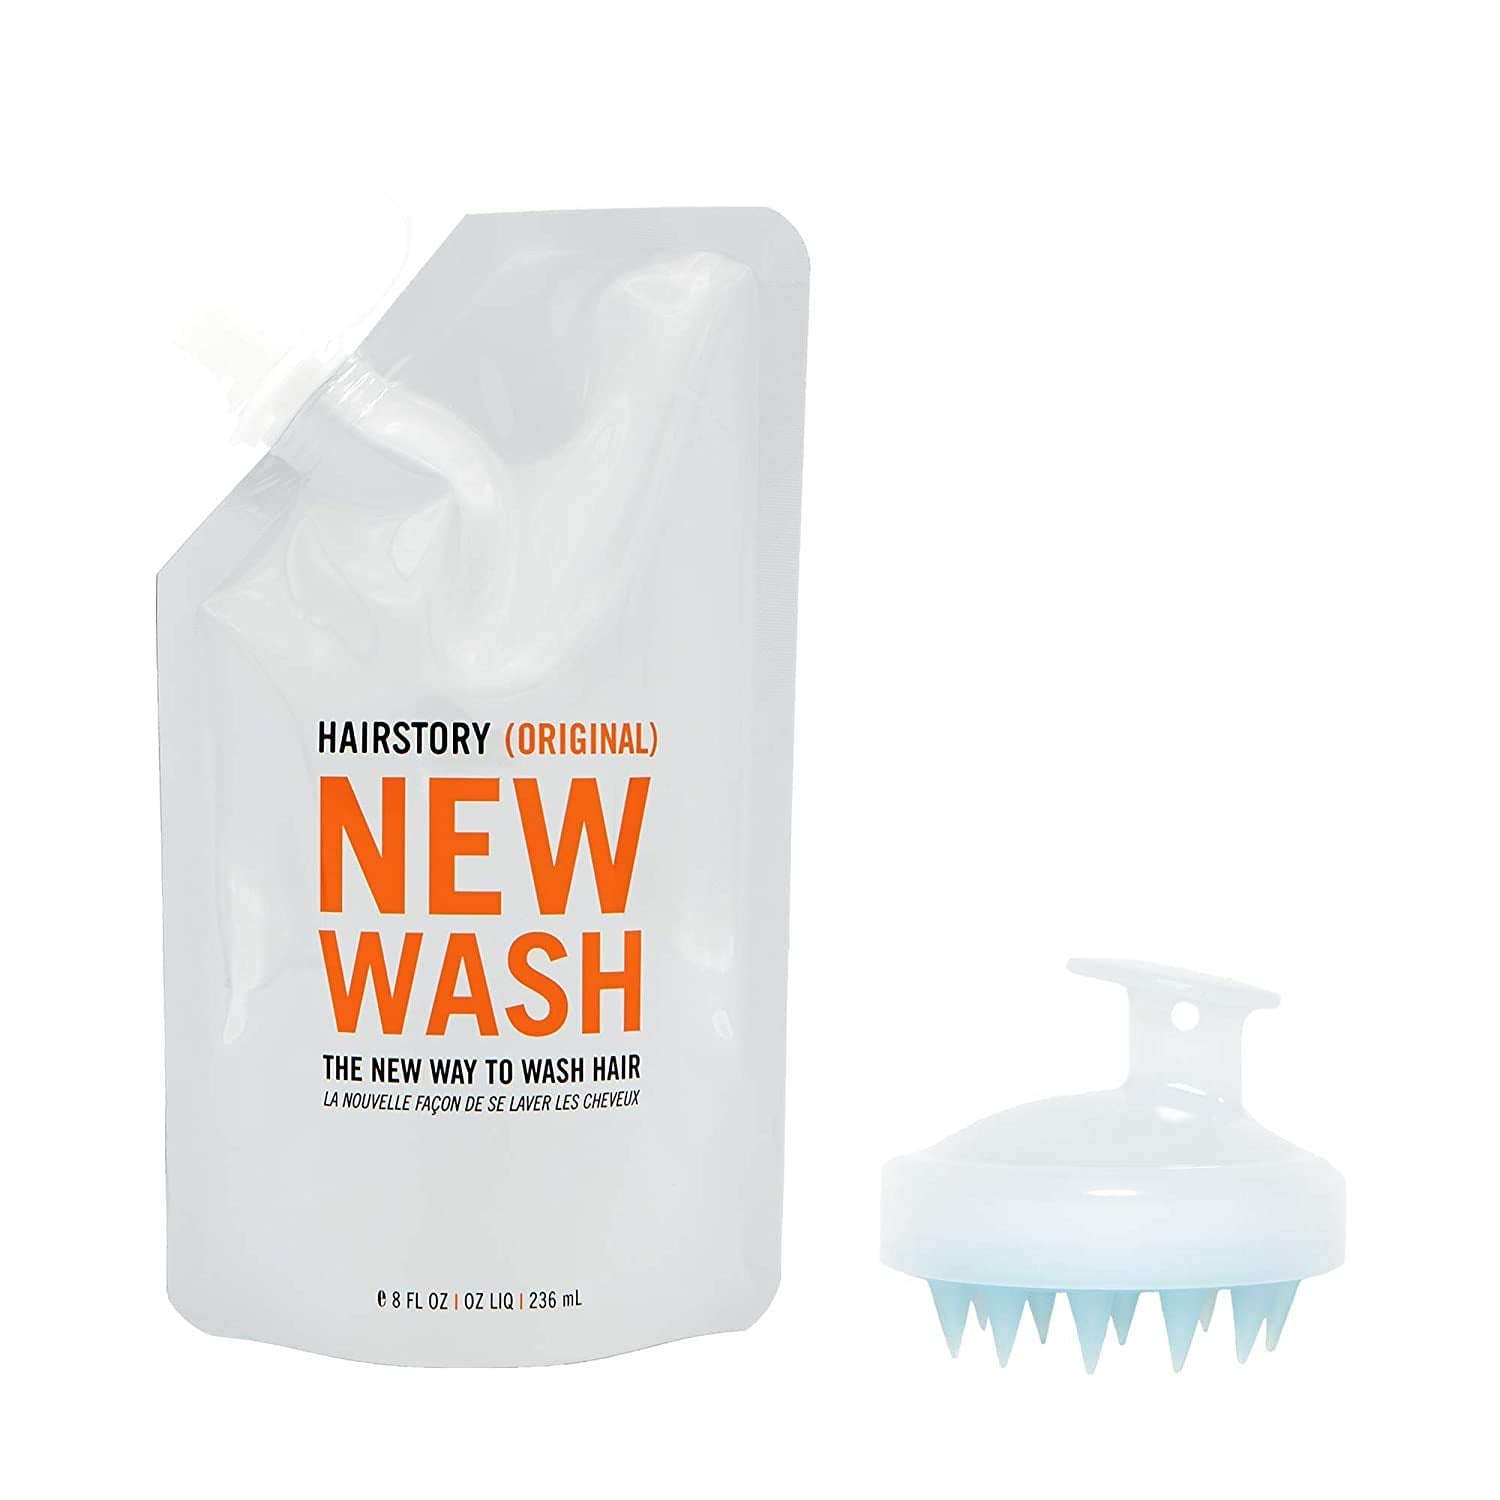 Hairstory New Wash (Original) Hair Cleanser and Conditioner, 8oz Pouch + Scalp | My Hair So Fresh, and I Didn't Even a Shampoo and Conditioner to Get Here